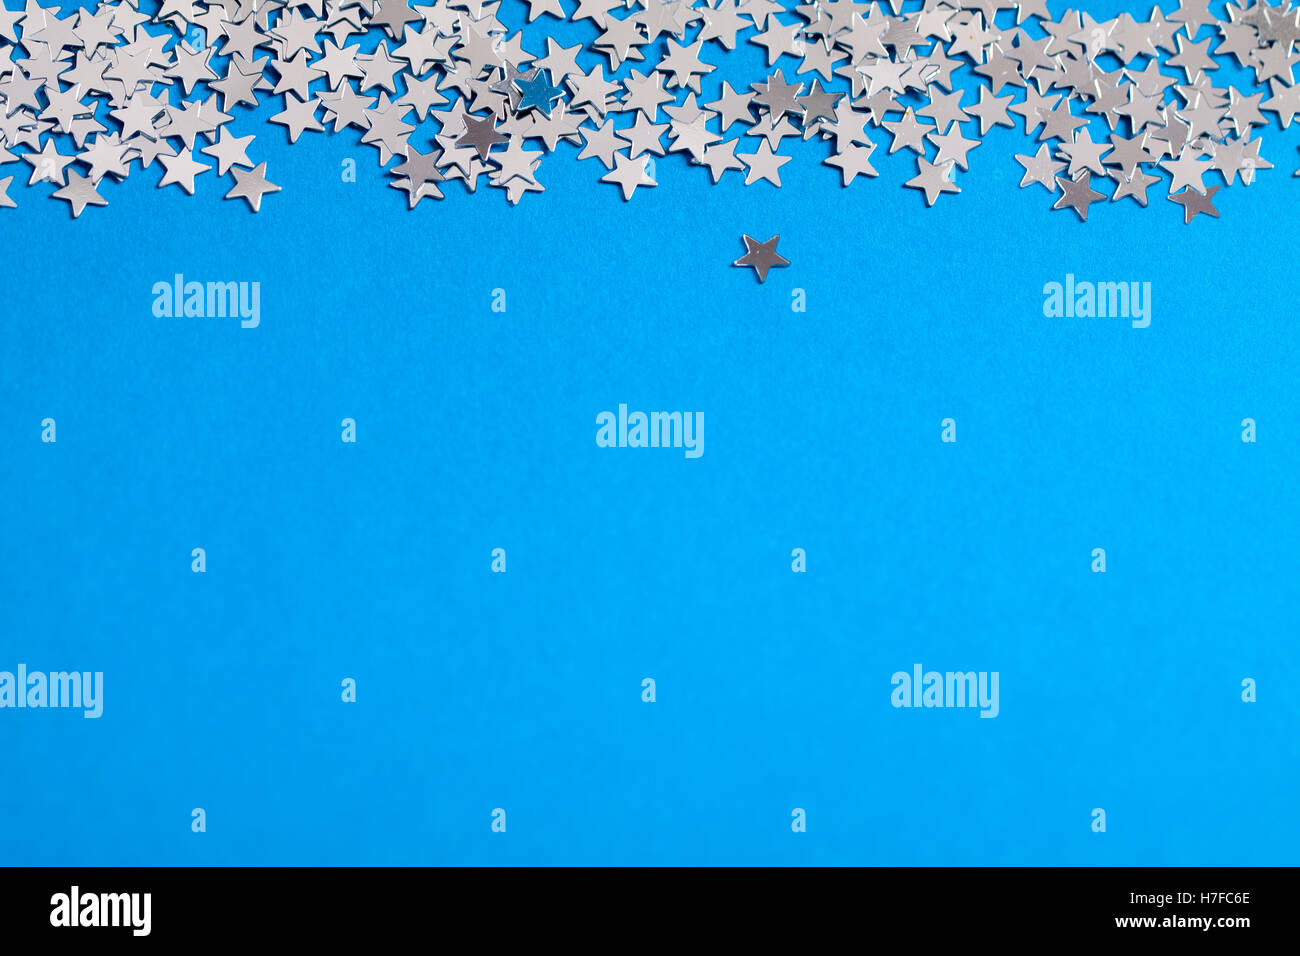 Frame of scatters little silver stars on blue background. Stock Photo